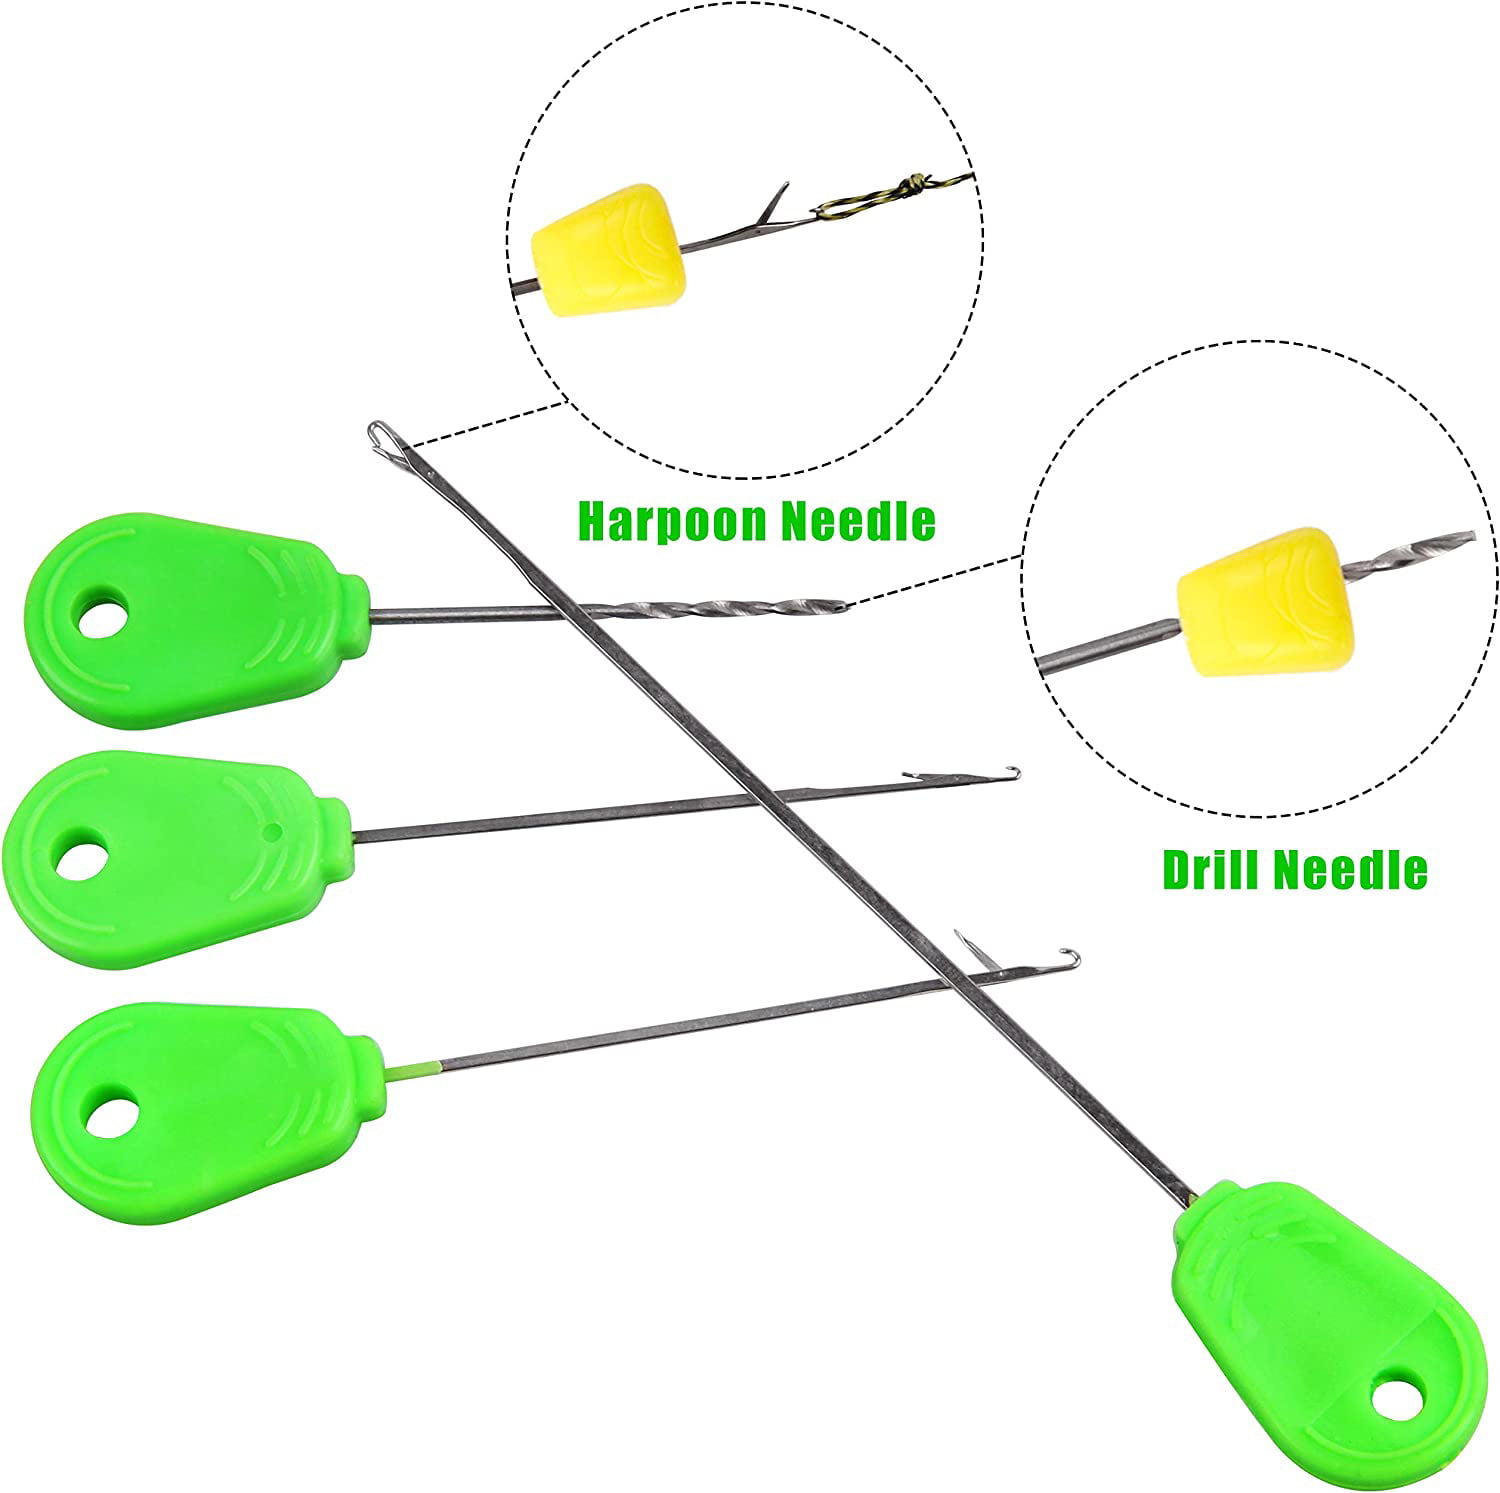 Carp Fishing Hair Rigs 45pcs Curved Barbed Carp Hook Braided Line Bait  Stopper Needle Tool Scent Corn 